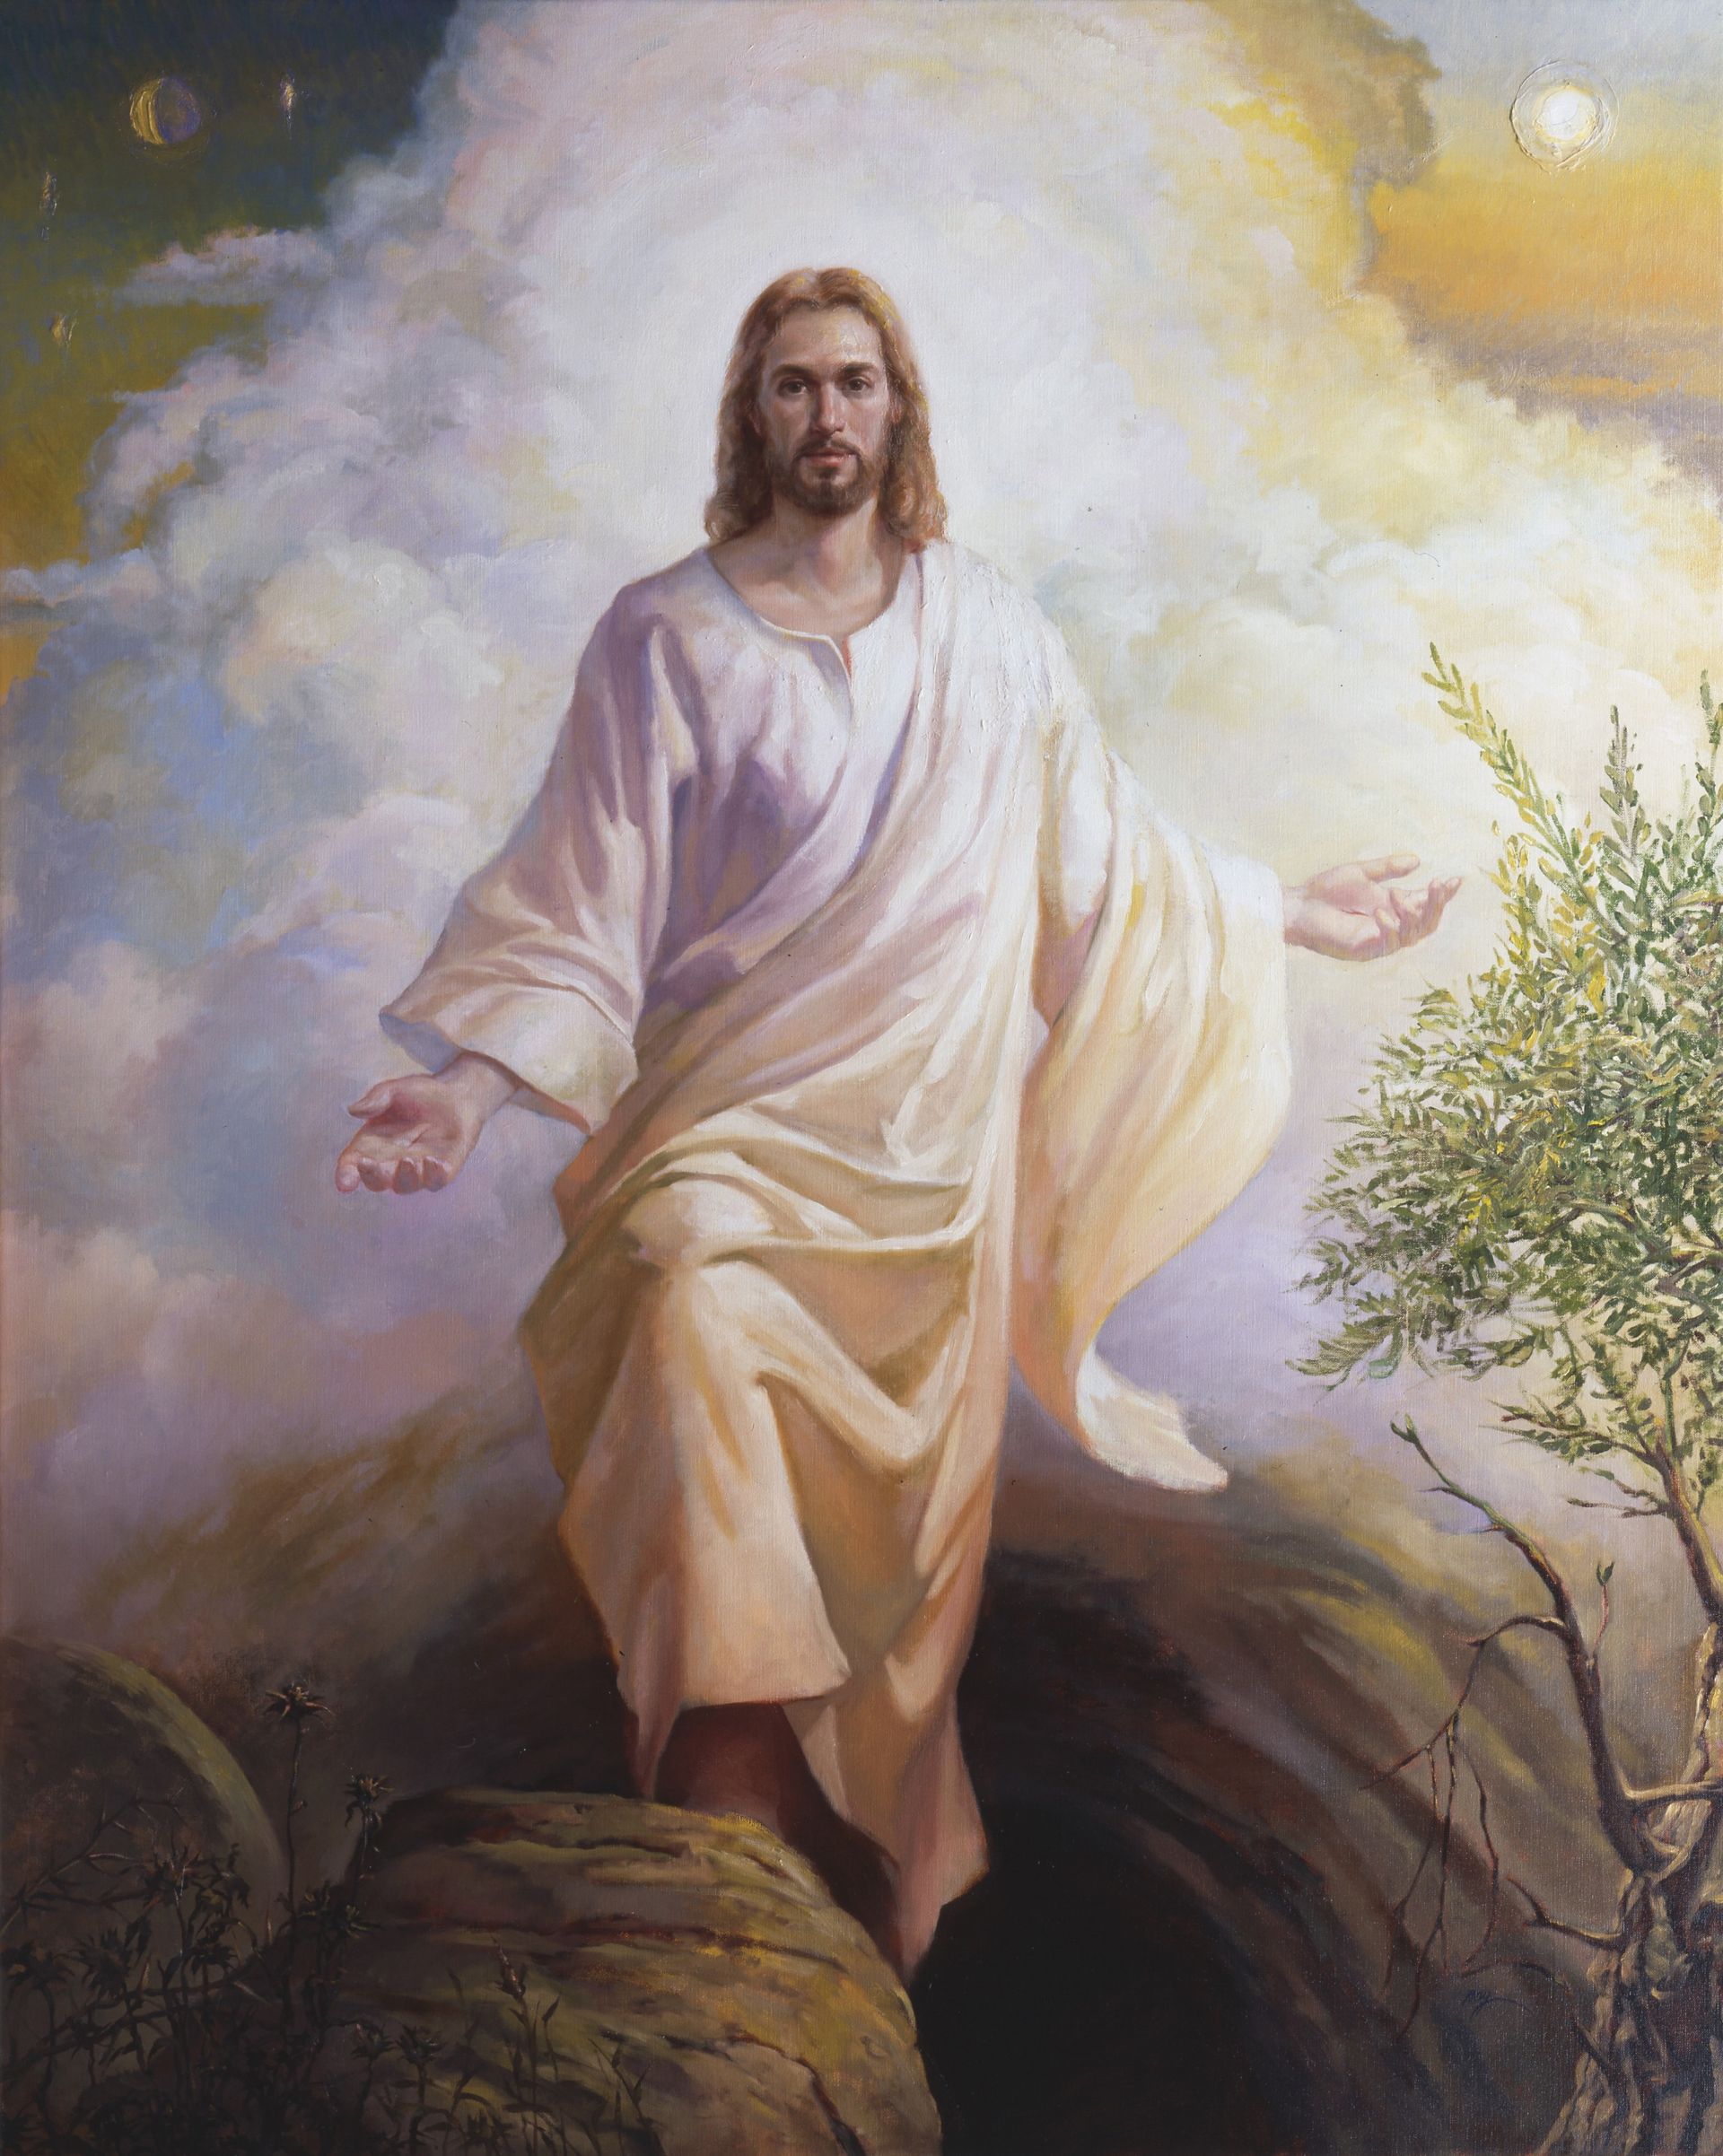 The Resurrected Christ, by Wilson J. Ong